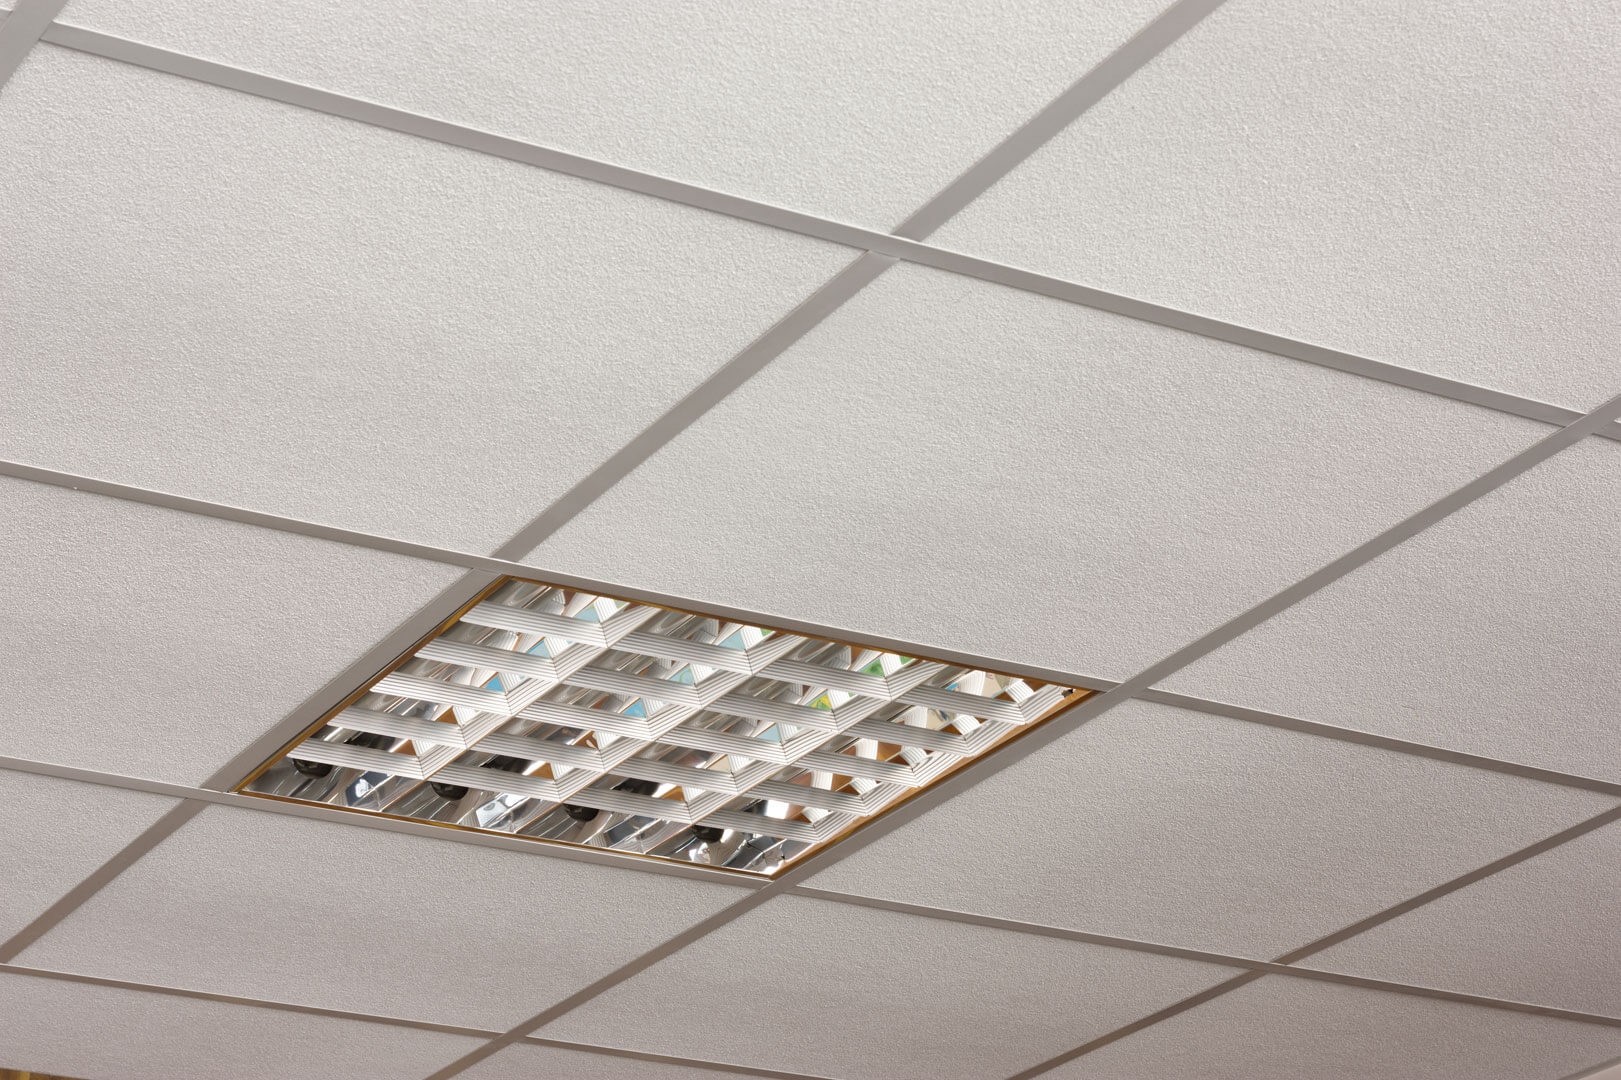 Permalink to Pictures Of Suspended Ceiling Tiles